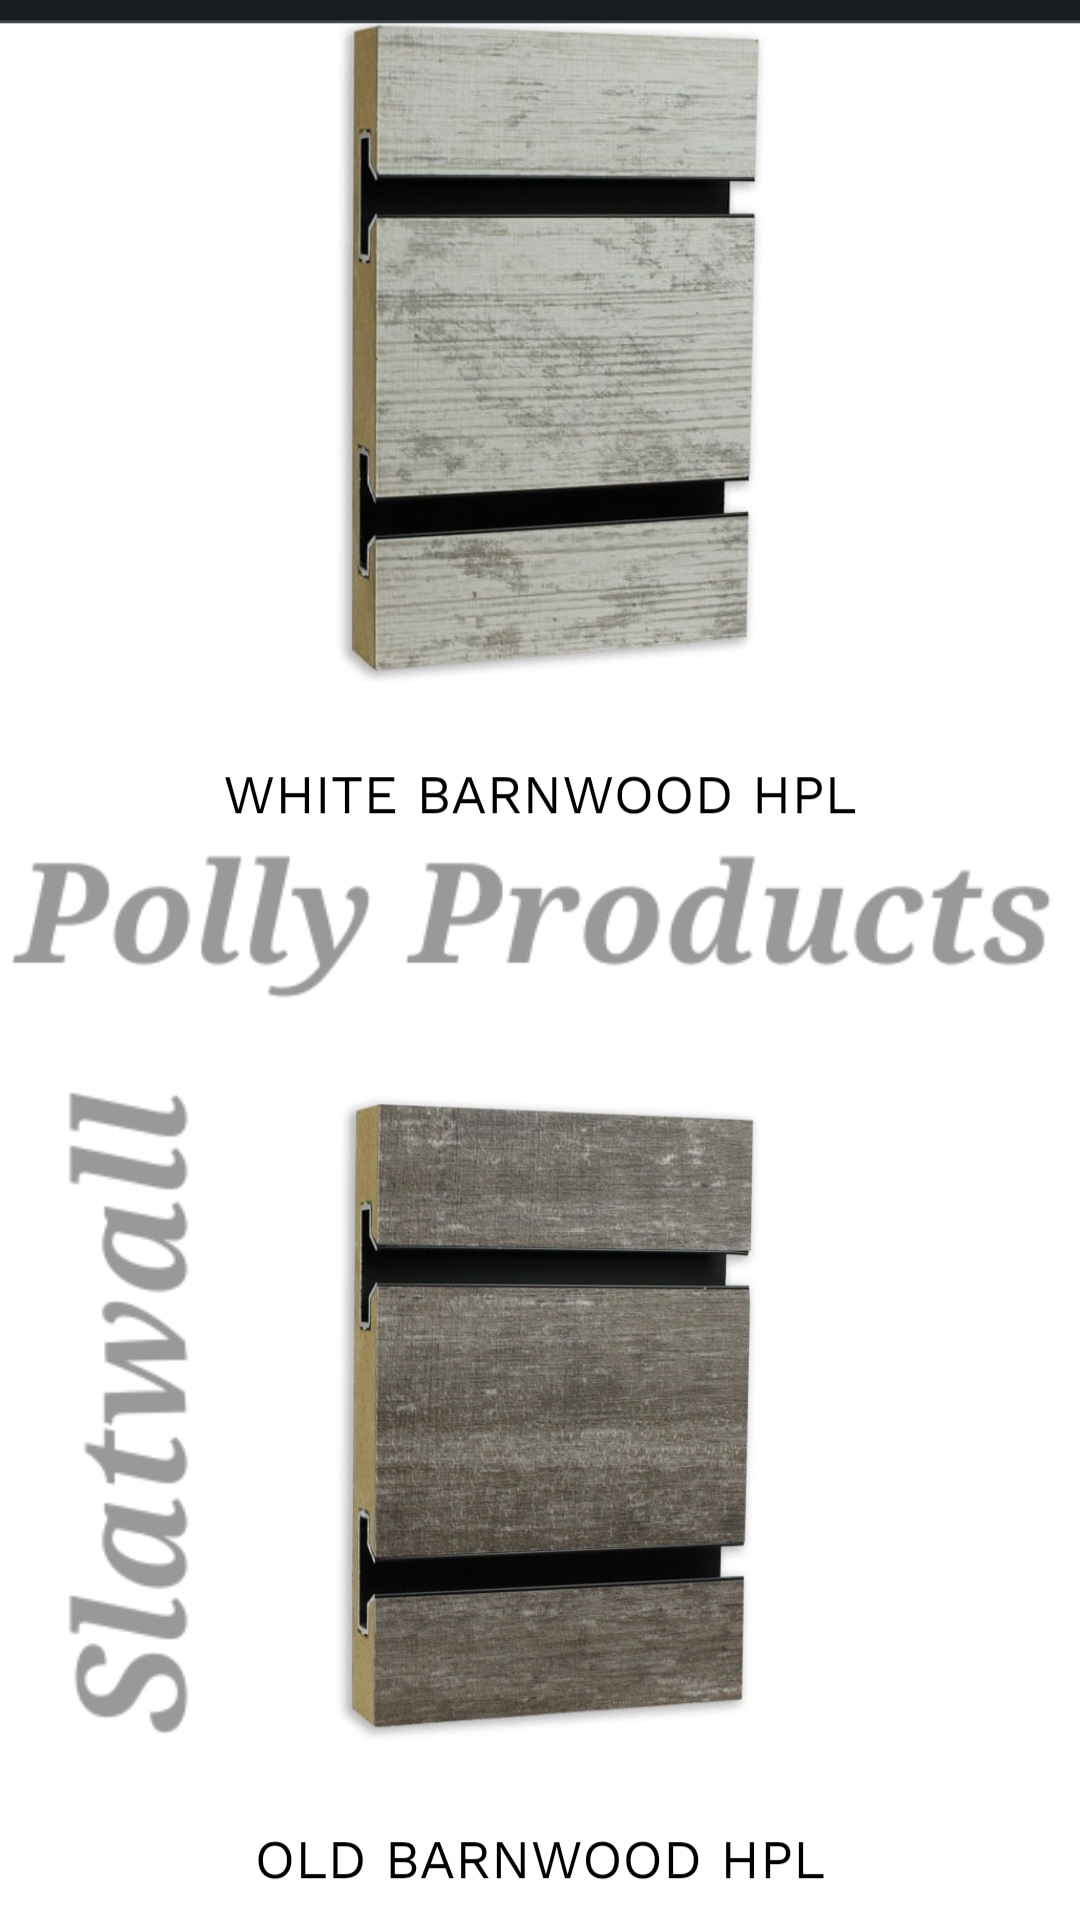 Barnwood Slatwall from PPC. MADE IN THE USA 🇺🇸 QUALITY PRODUCTS SINCE 1976.